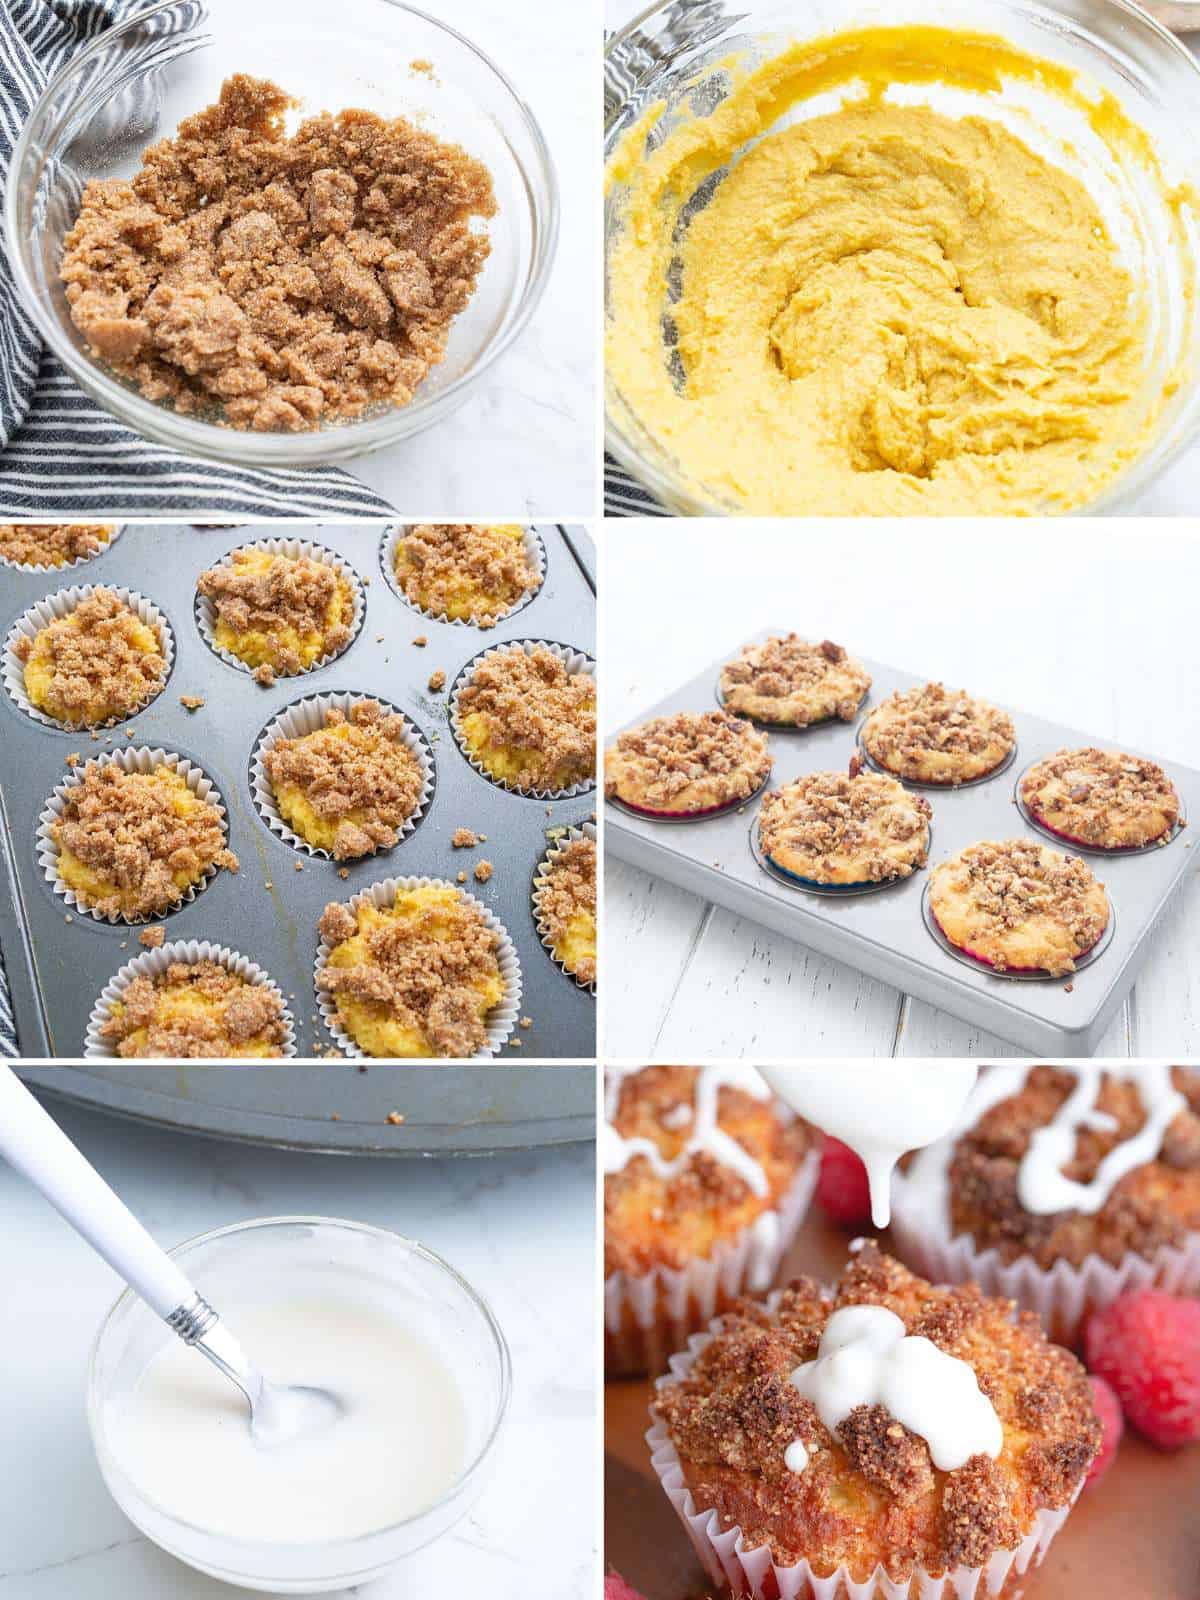 A collage of 6 image showing the steps for making Keto Coffee Cake Muffins.